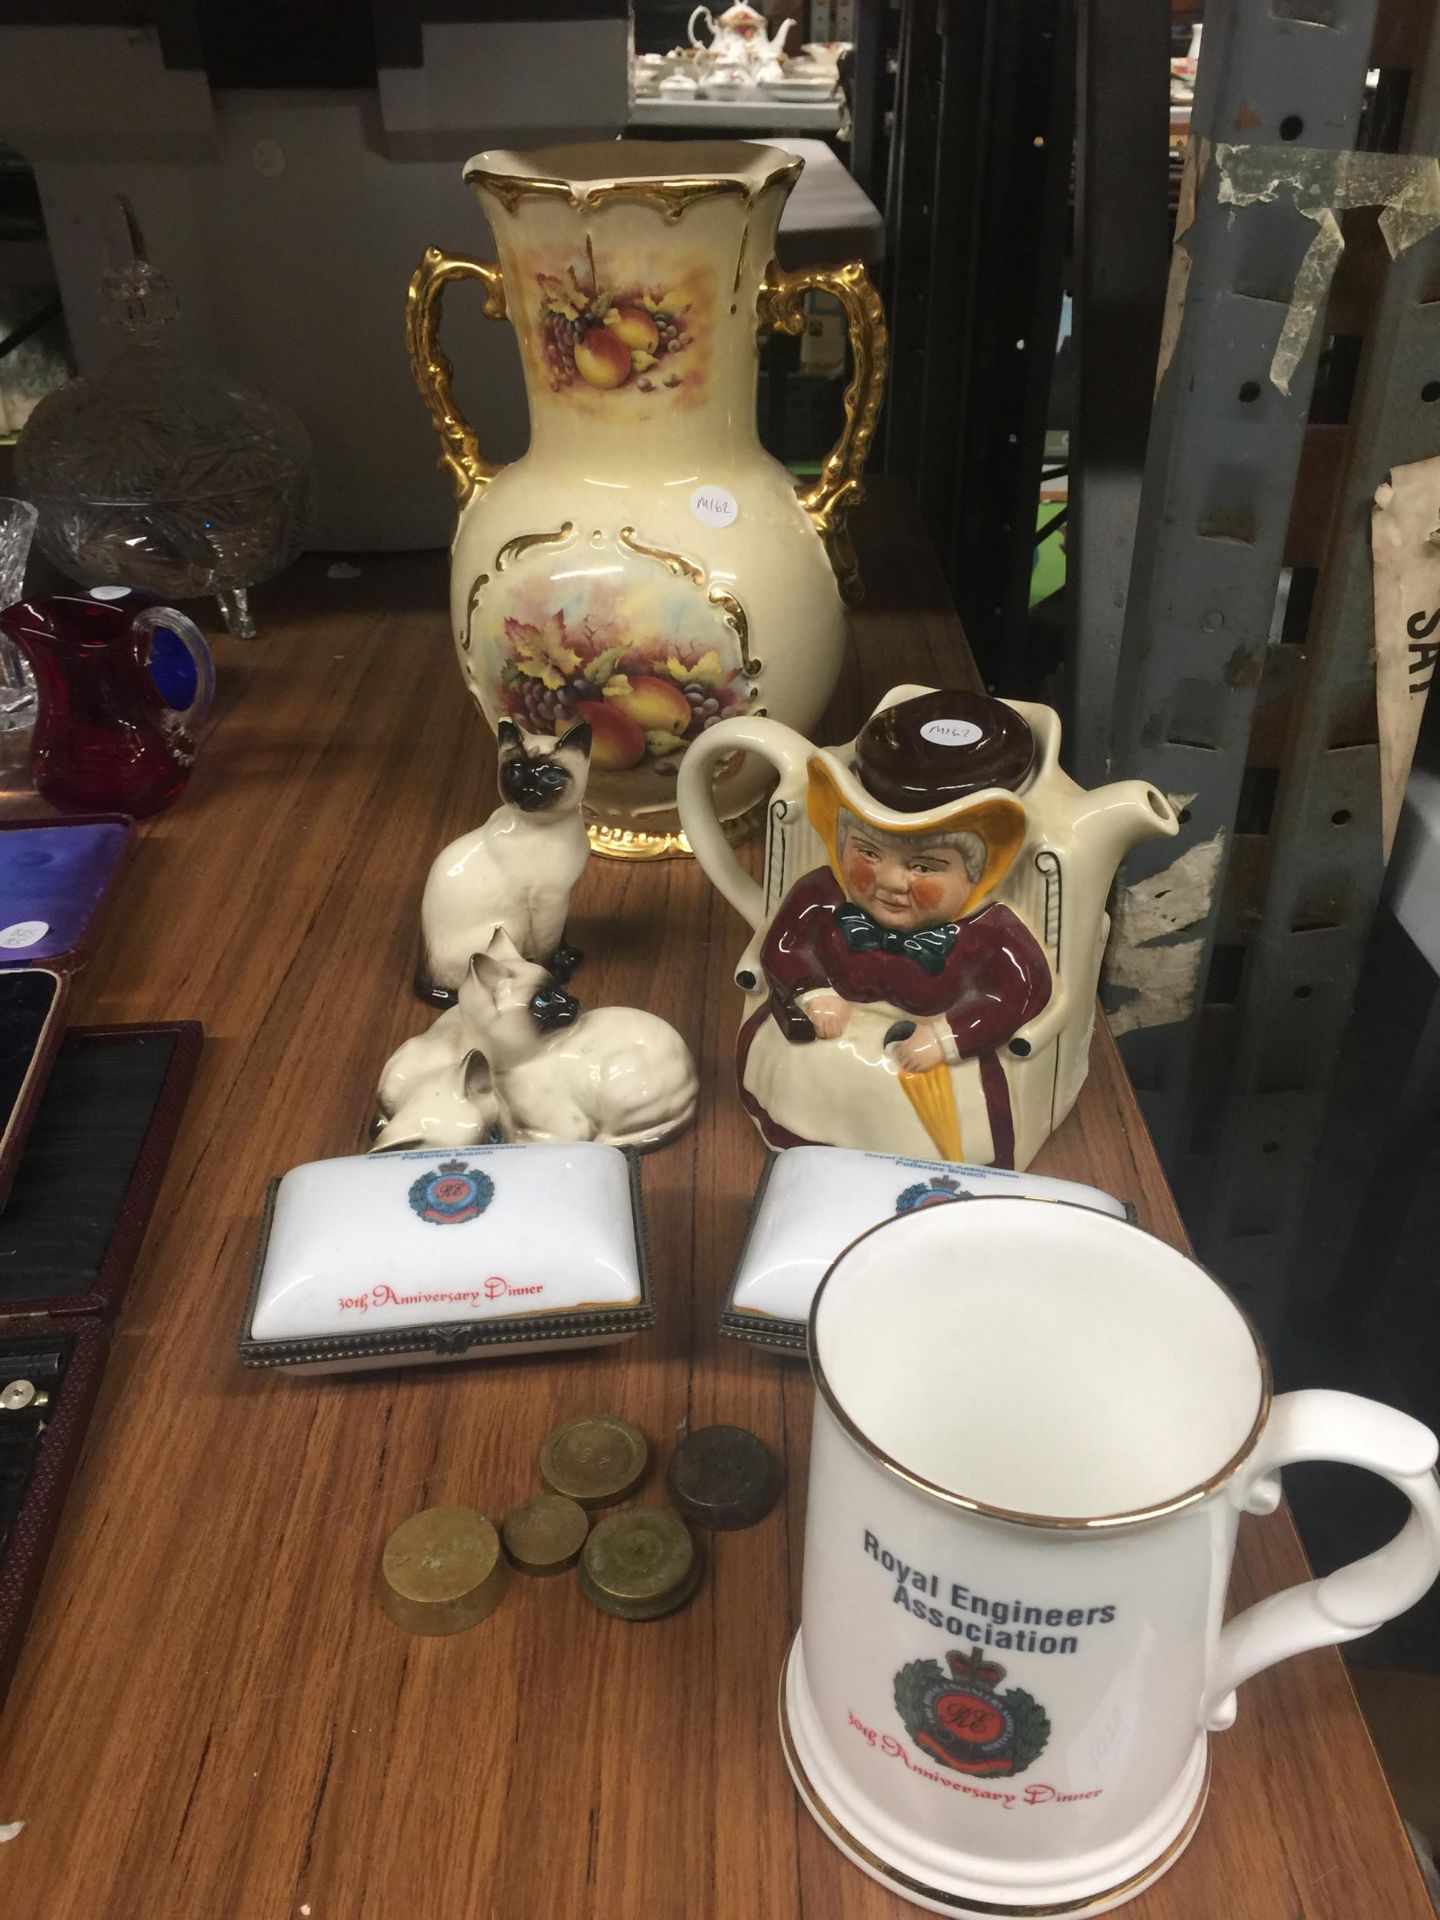 TWO ROYAL ENGINEERS, POTTERIES BRANCH, CERAMIC AND METAL TRINKET BOXES, A VICTORIAN FLORAL VASE, A